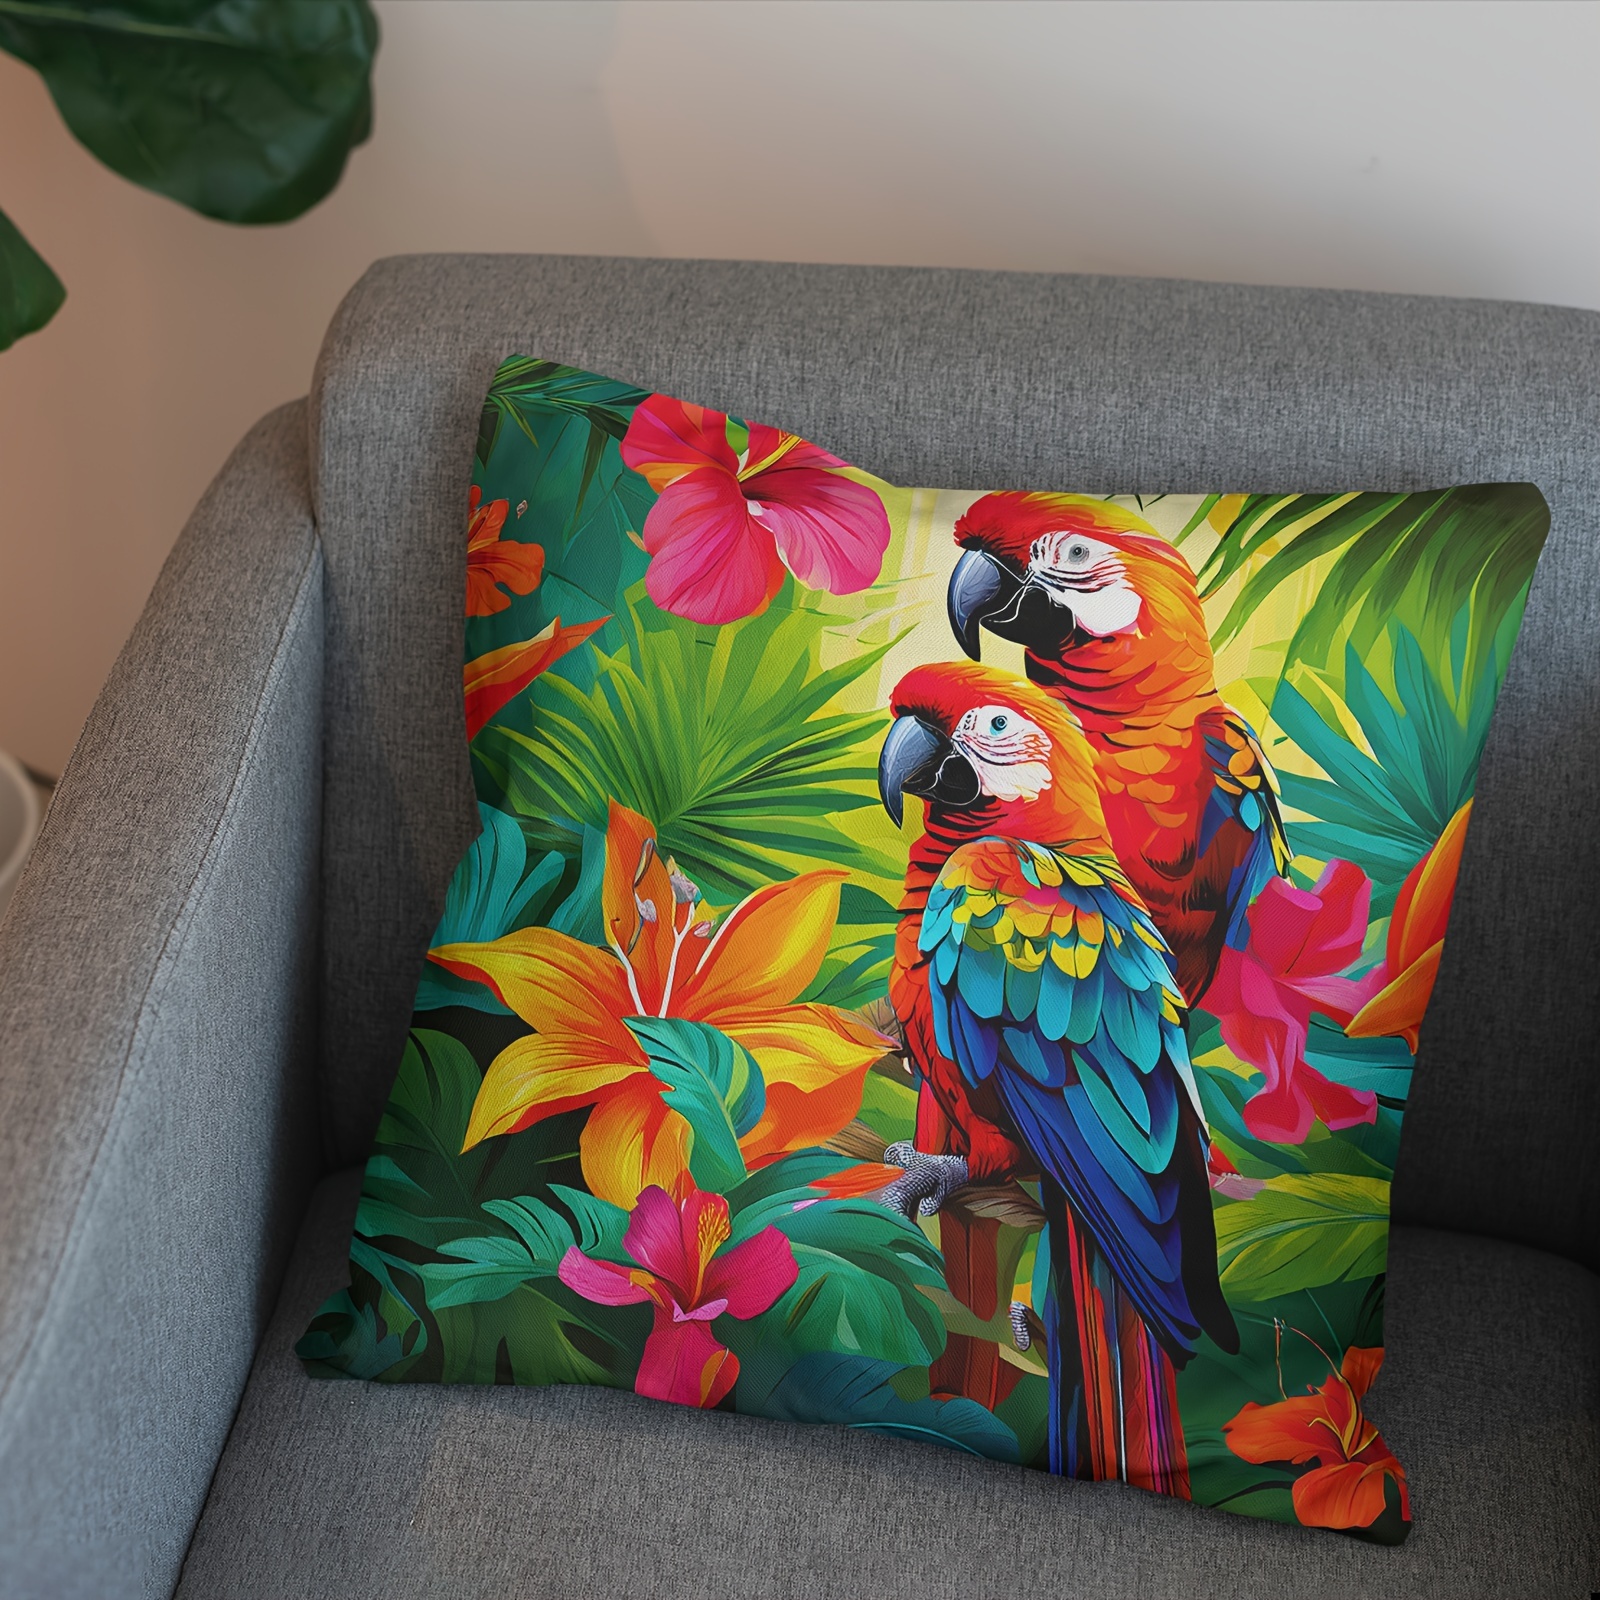 

Tropical Parrot Floral Outdoor Throw Pillow Cover, Country Rustic Style, Machine Washable Microfiber, Zipper Closure, Square Decorative Cushion Case For Home Sofa Bedroom - 18x18 Inch (1pc)